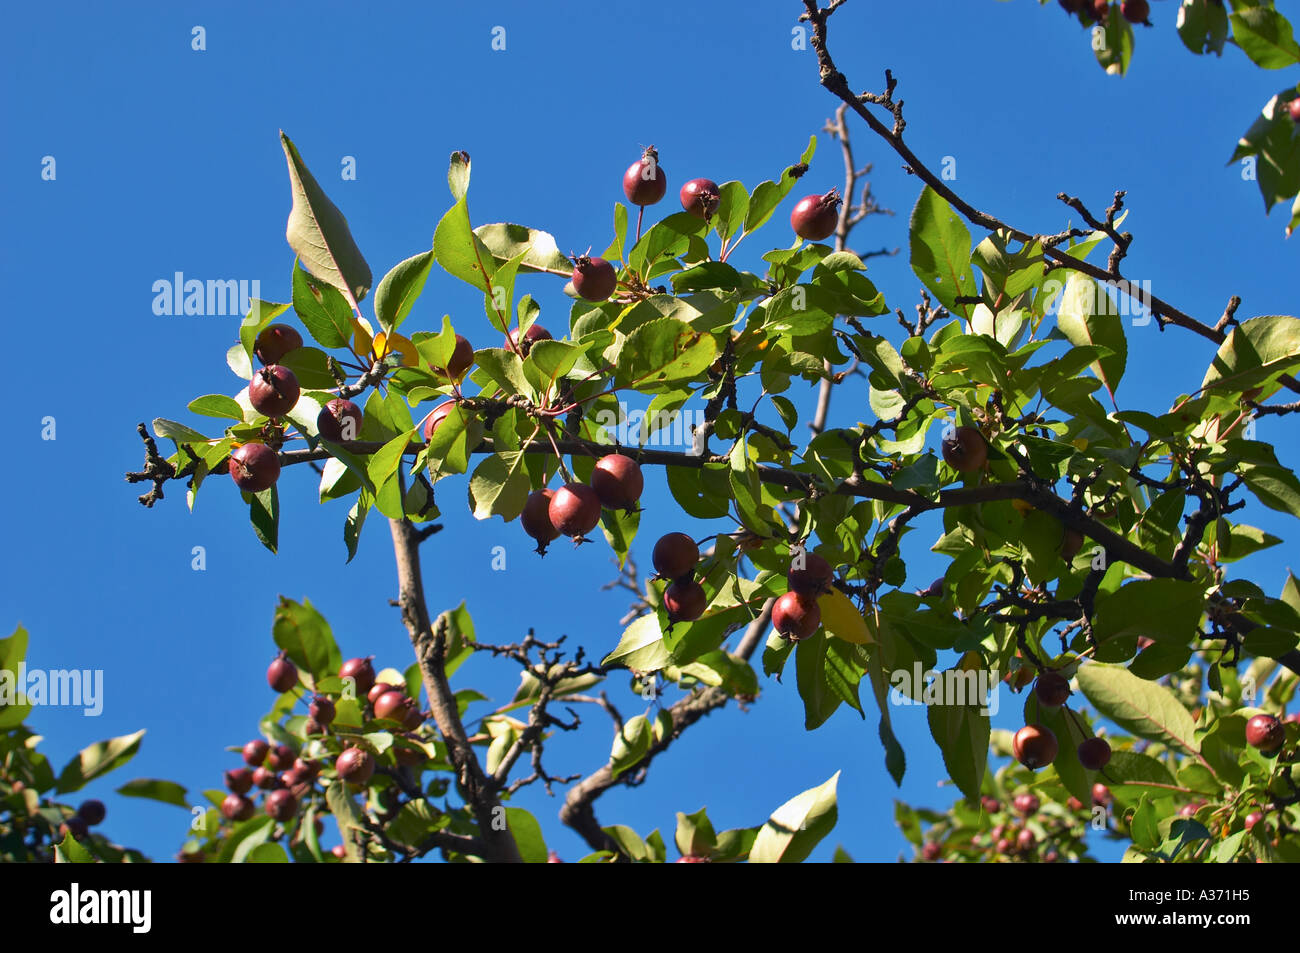 The Crab-tree or Wild Apple (Pyrus malus) branch and fruit detail against natural blue sky. Stock Photo